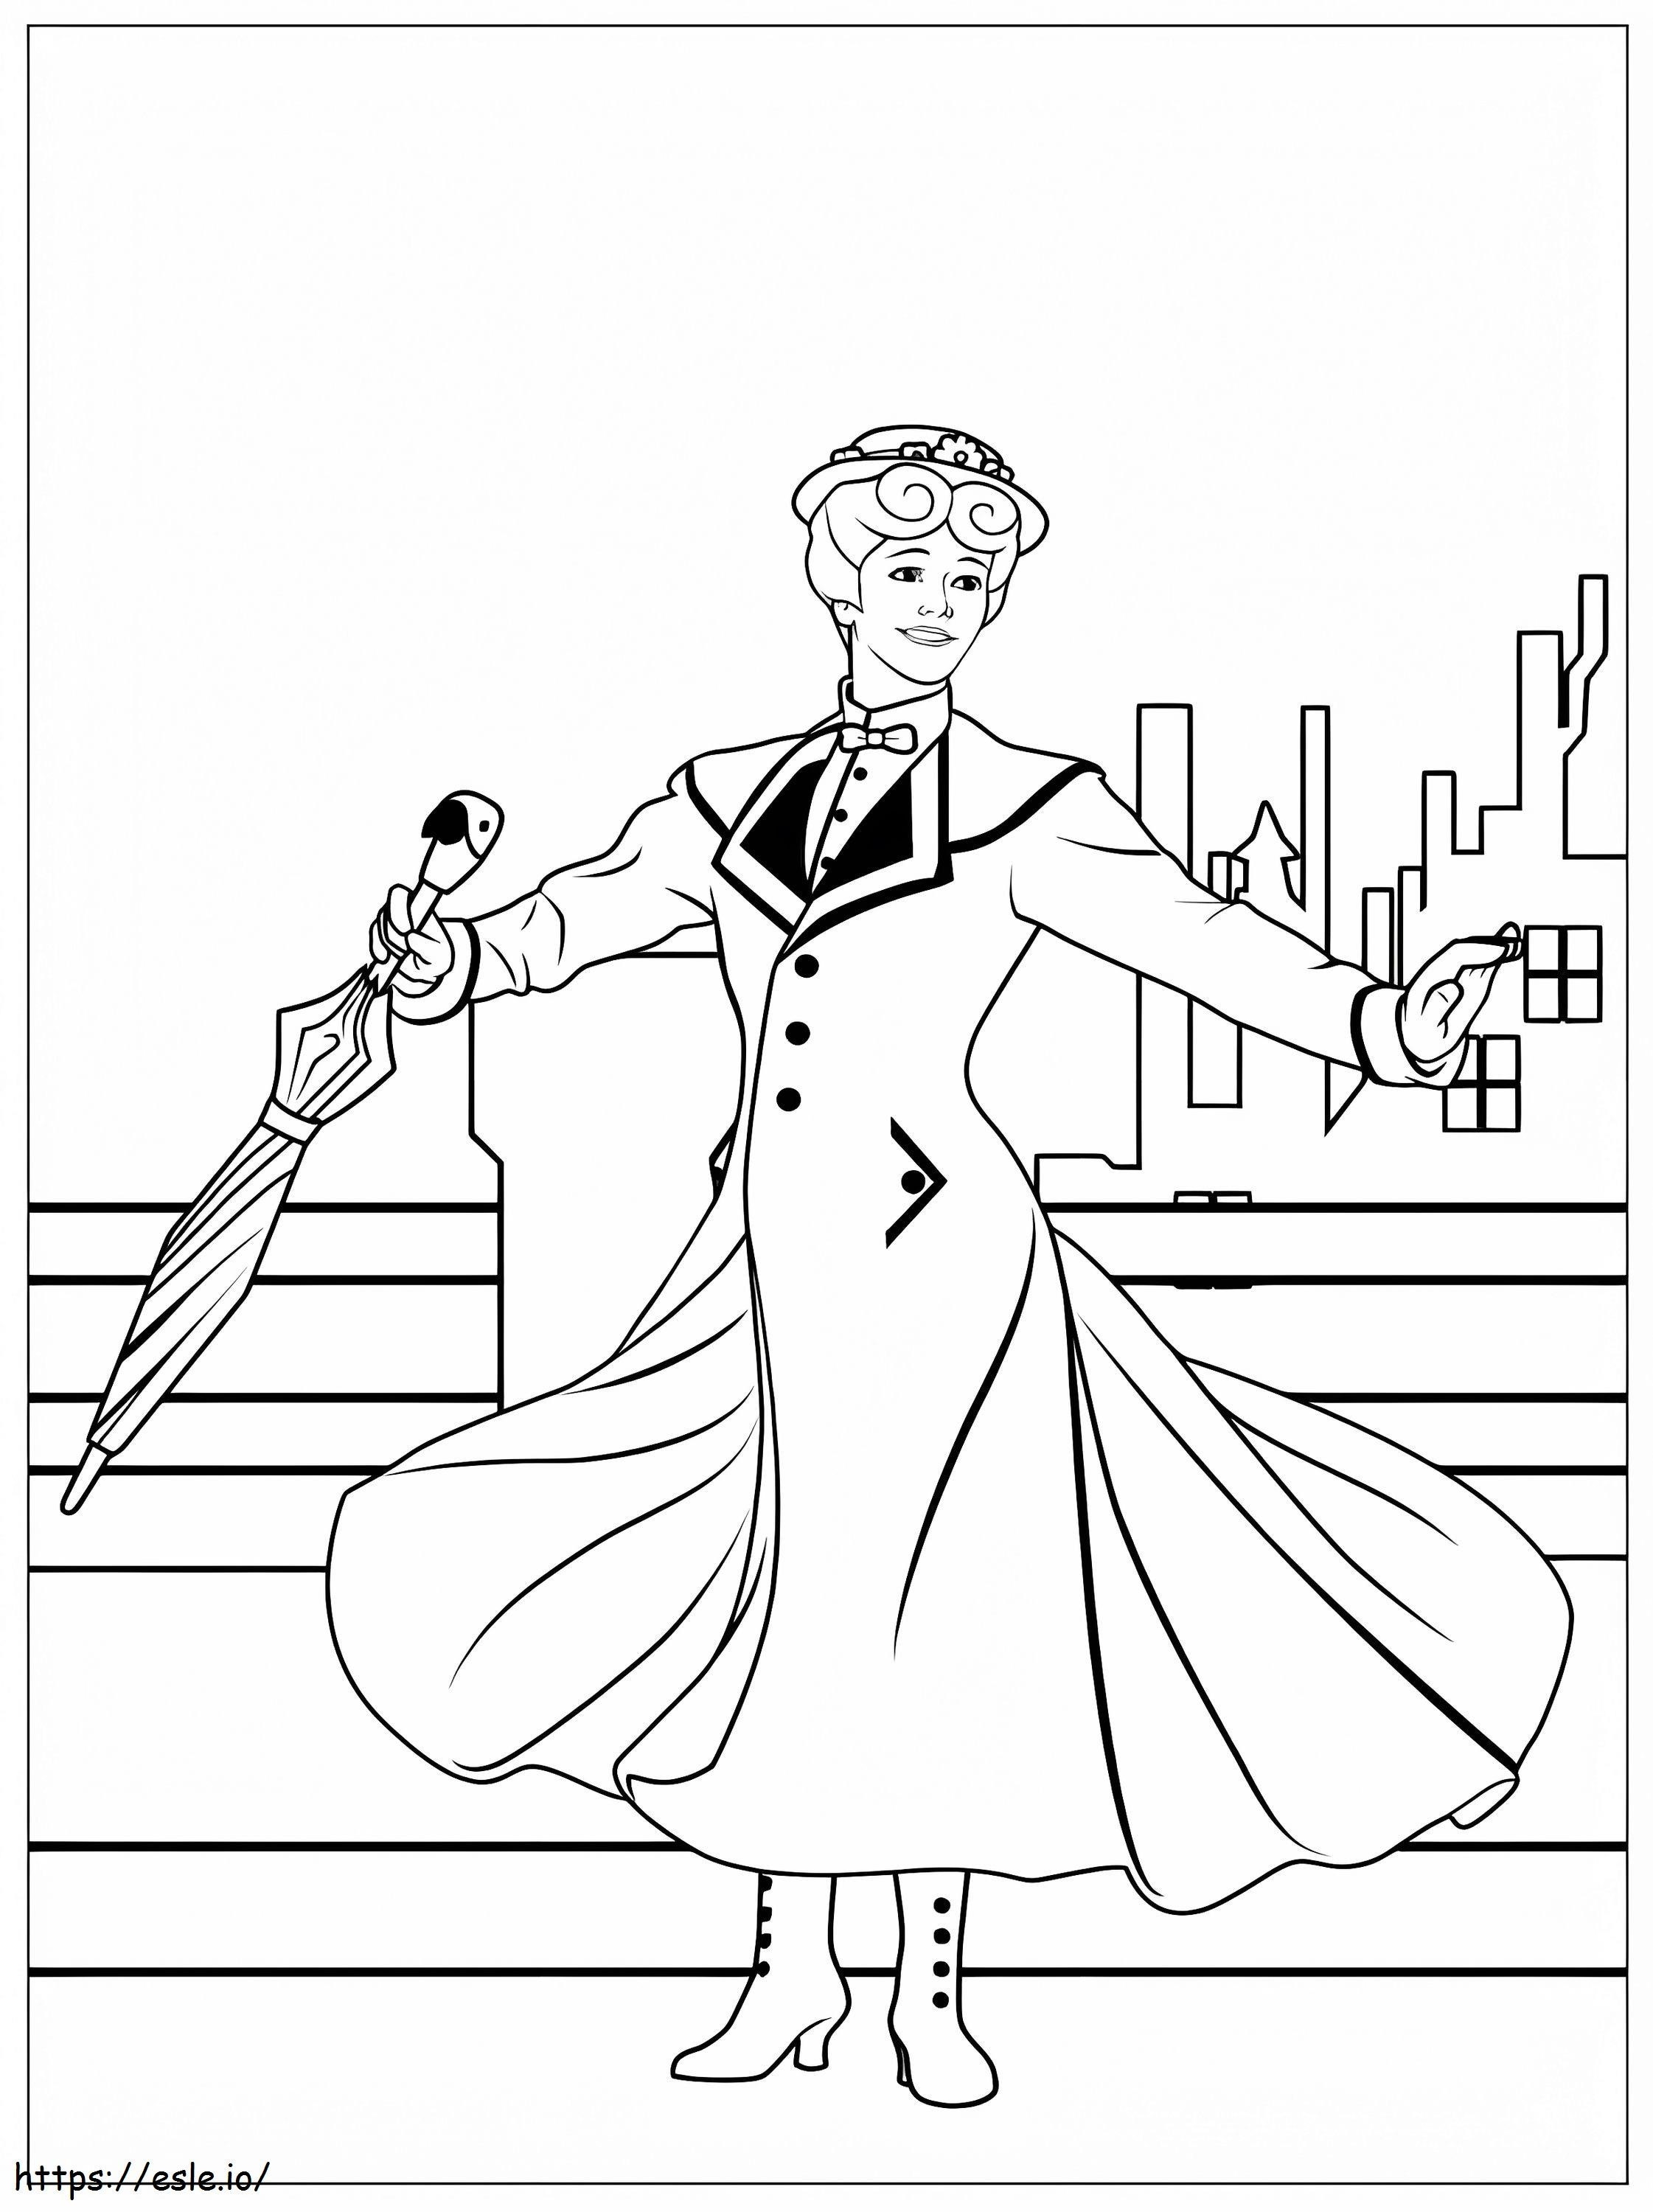 Mary Poppins 3 coloring page